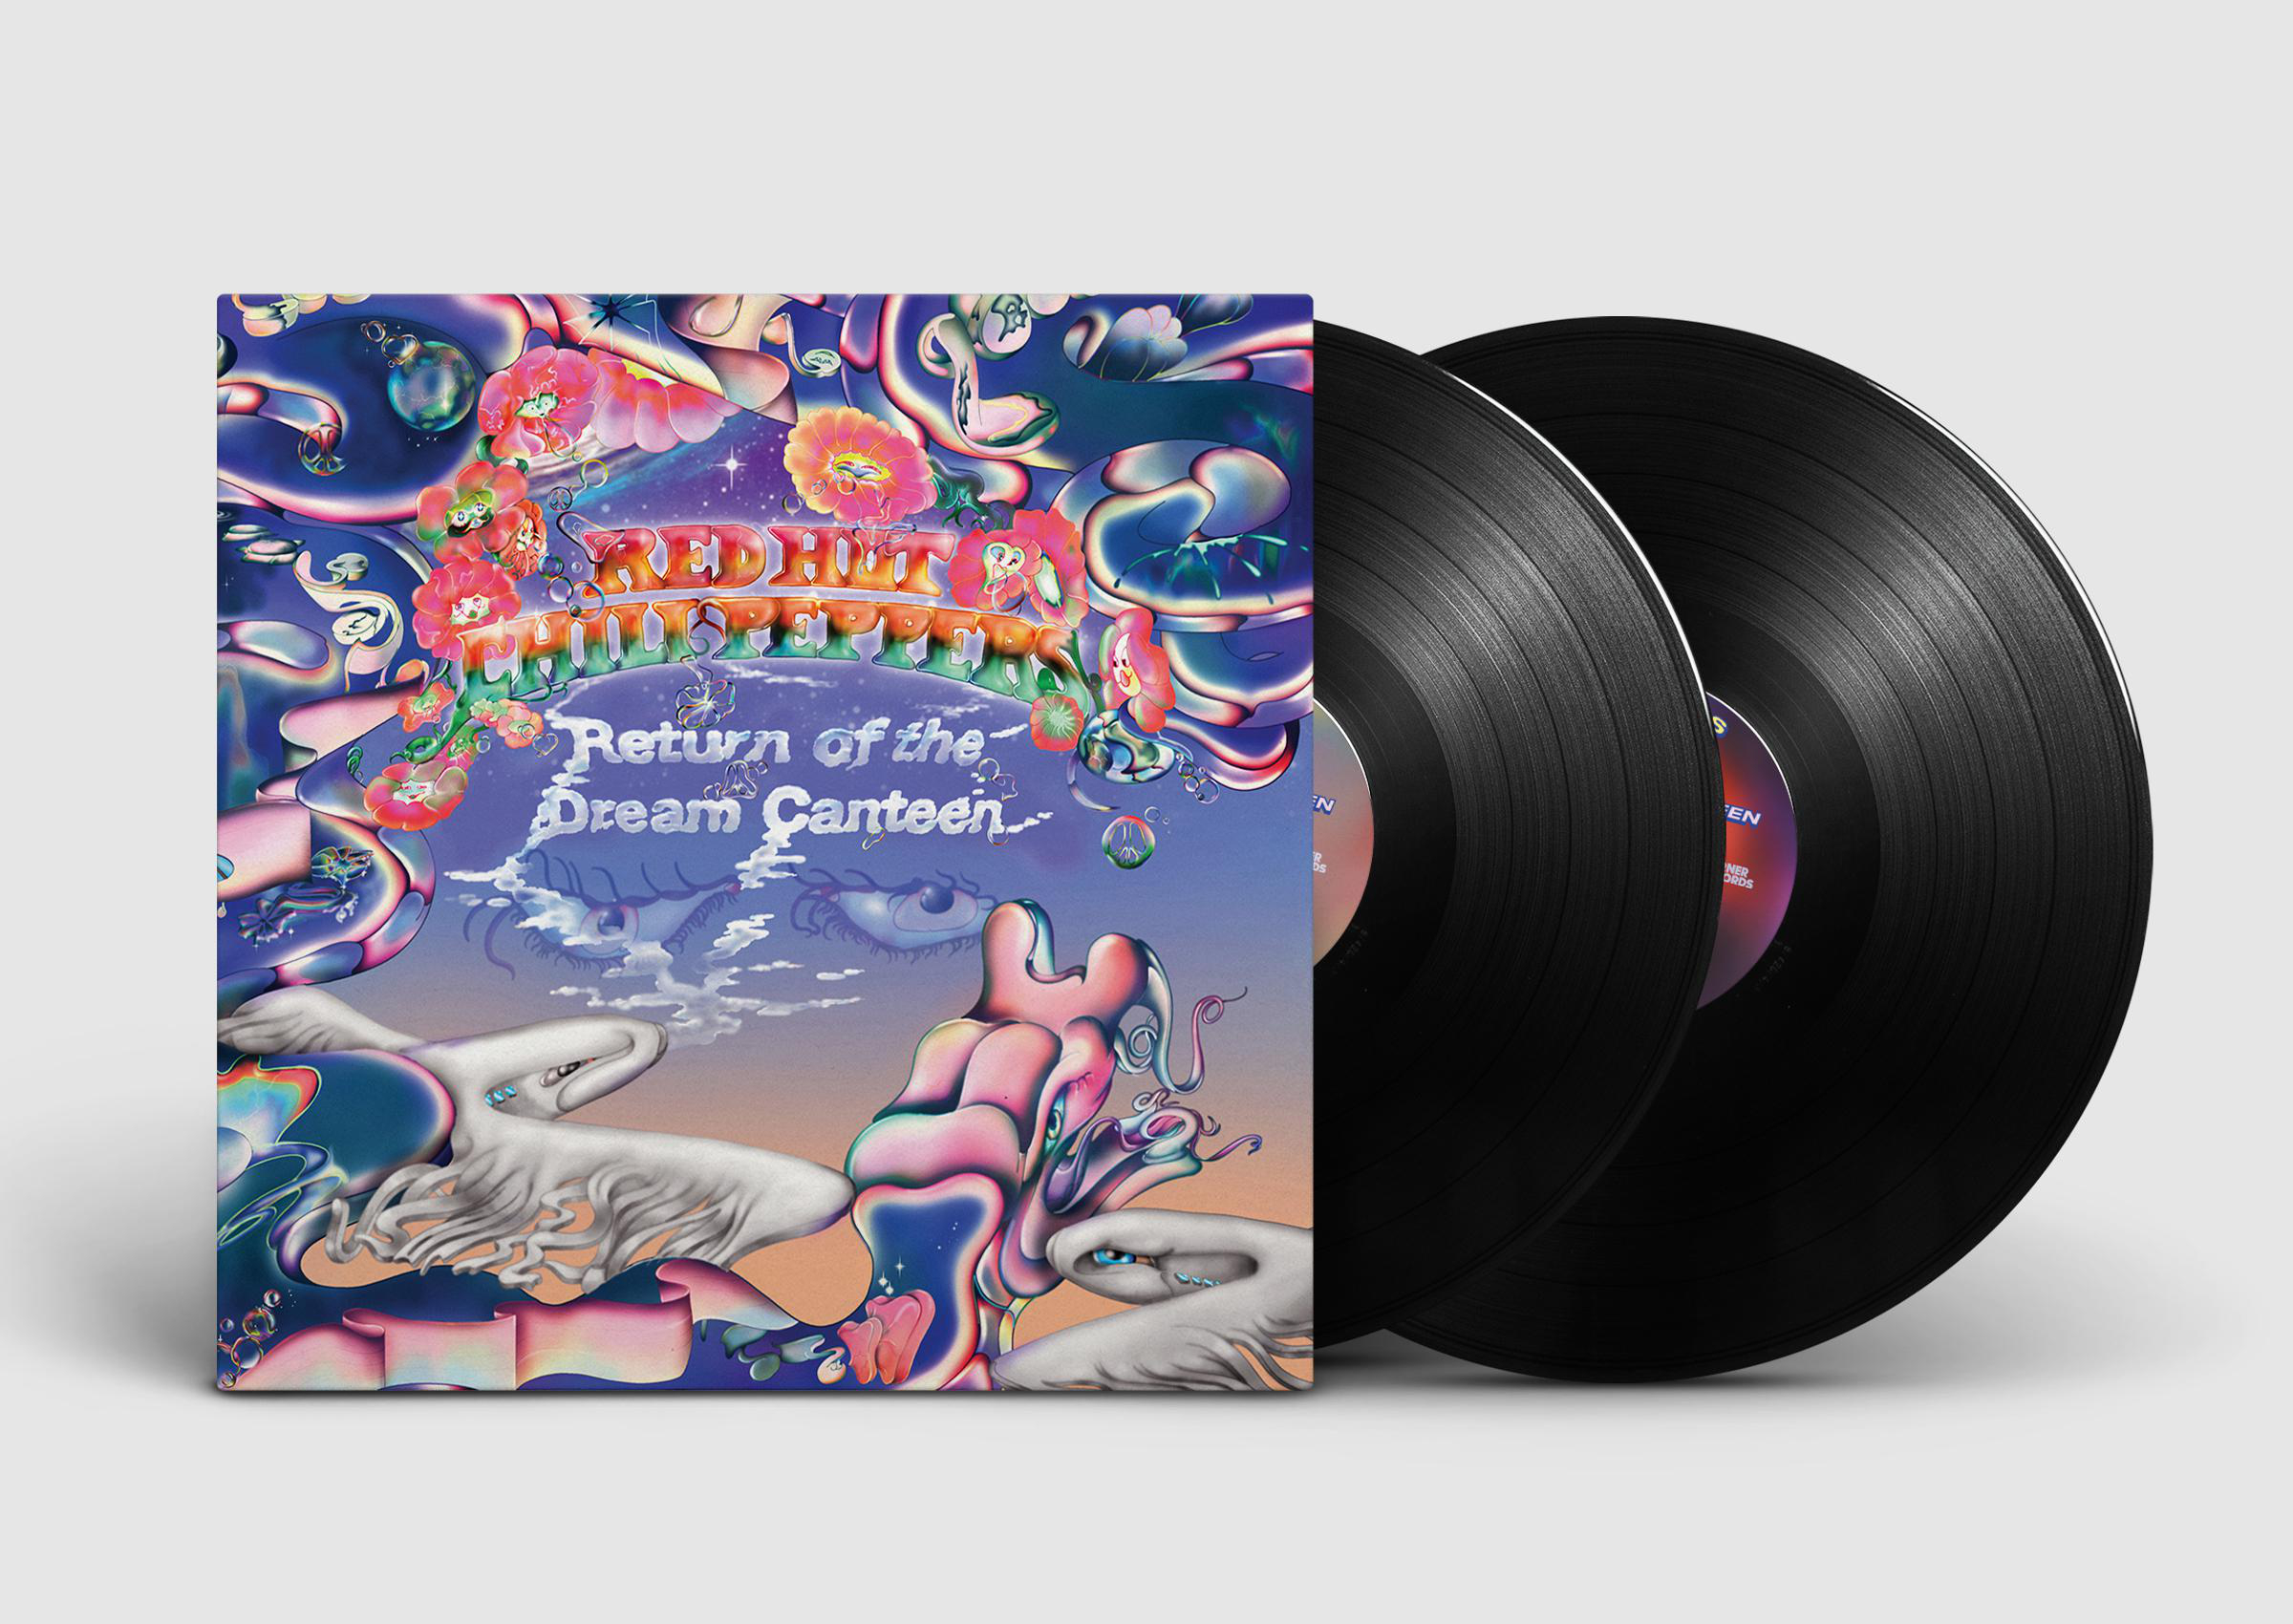 Red Hot Chili Peppers Return (Vinyl) of - - the Dream Canteen